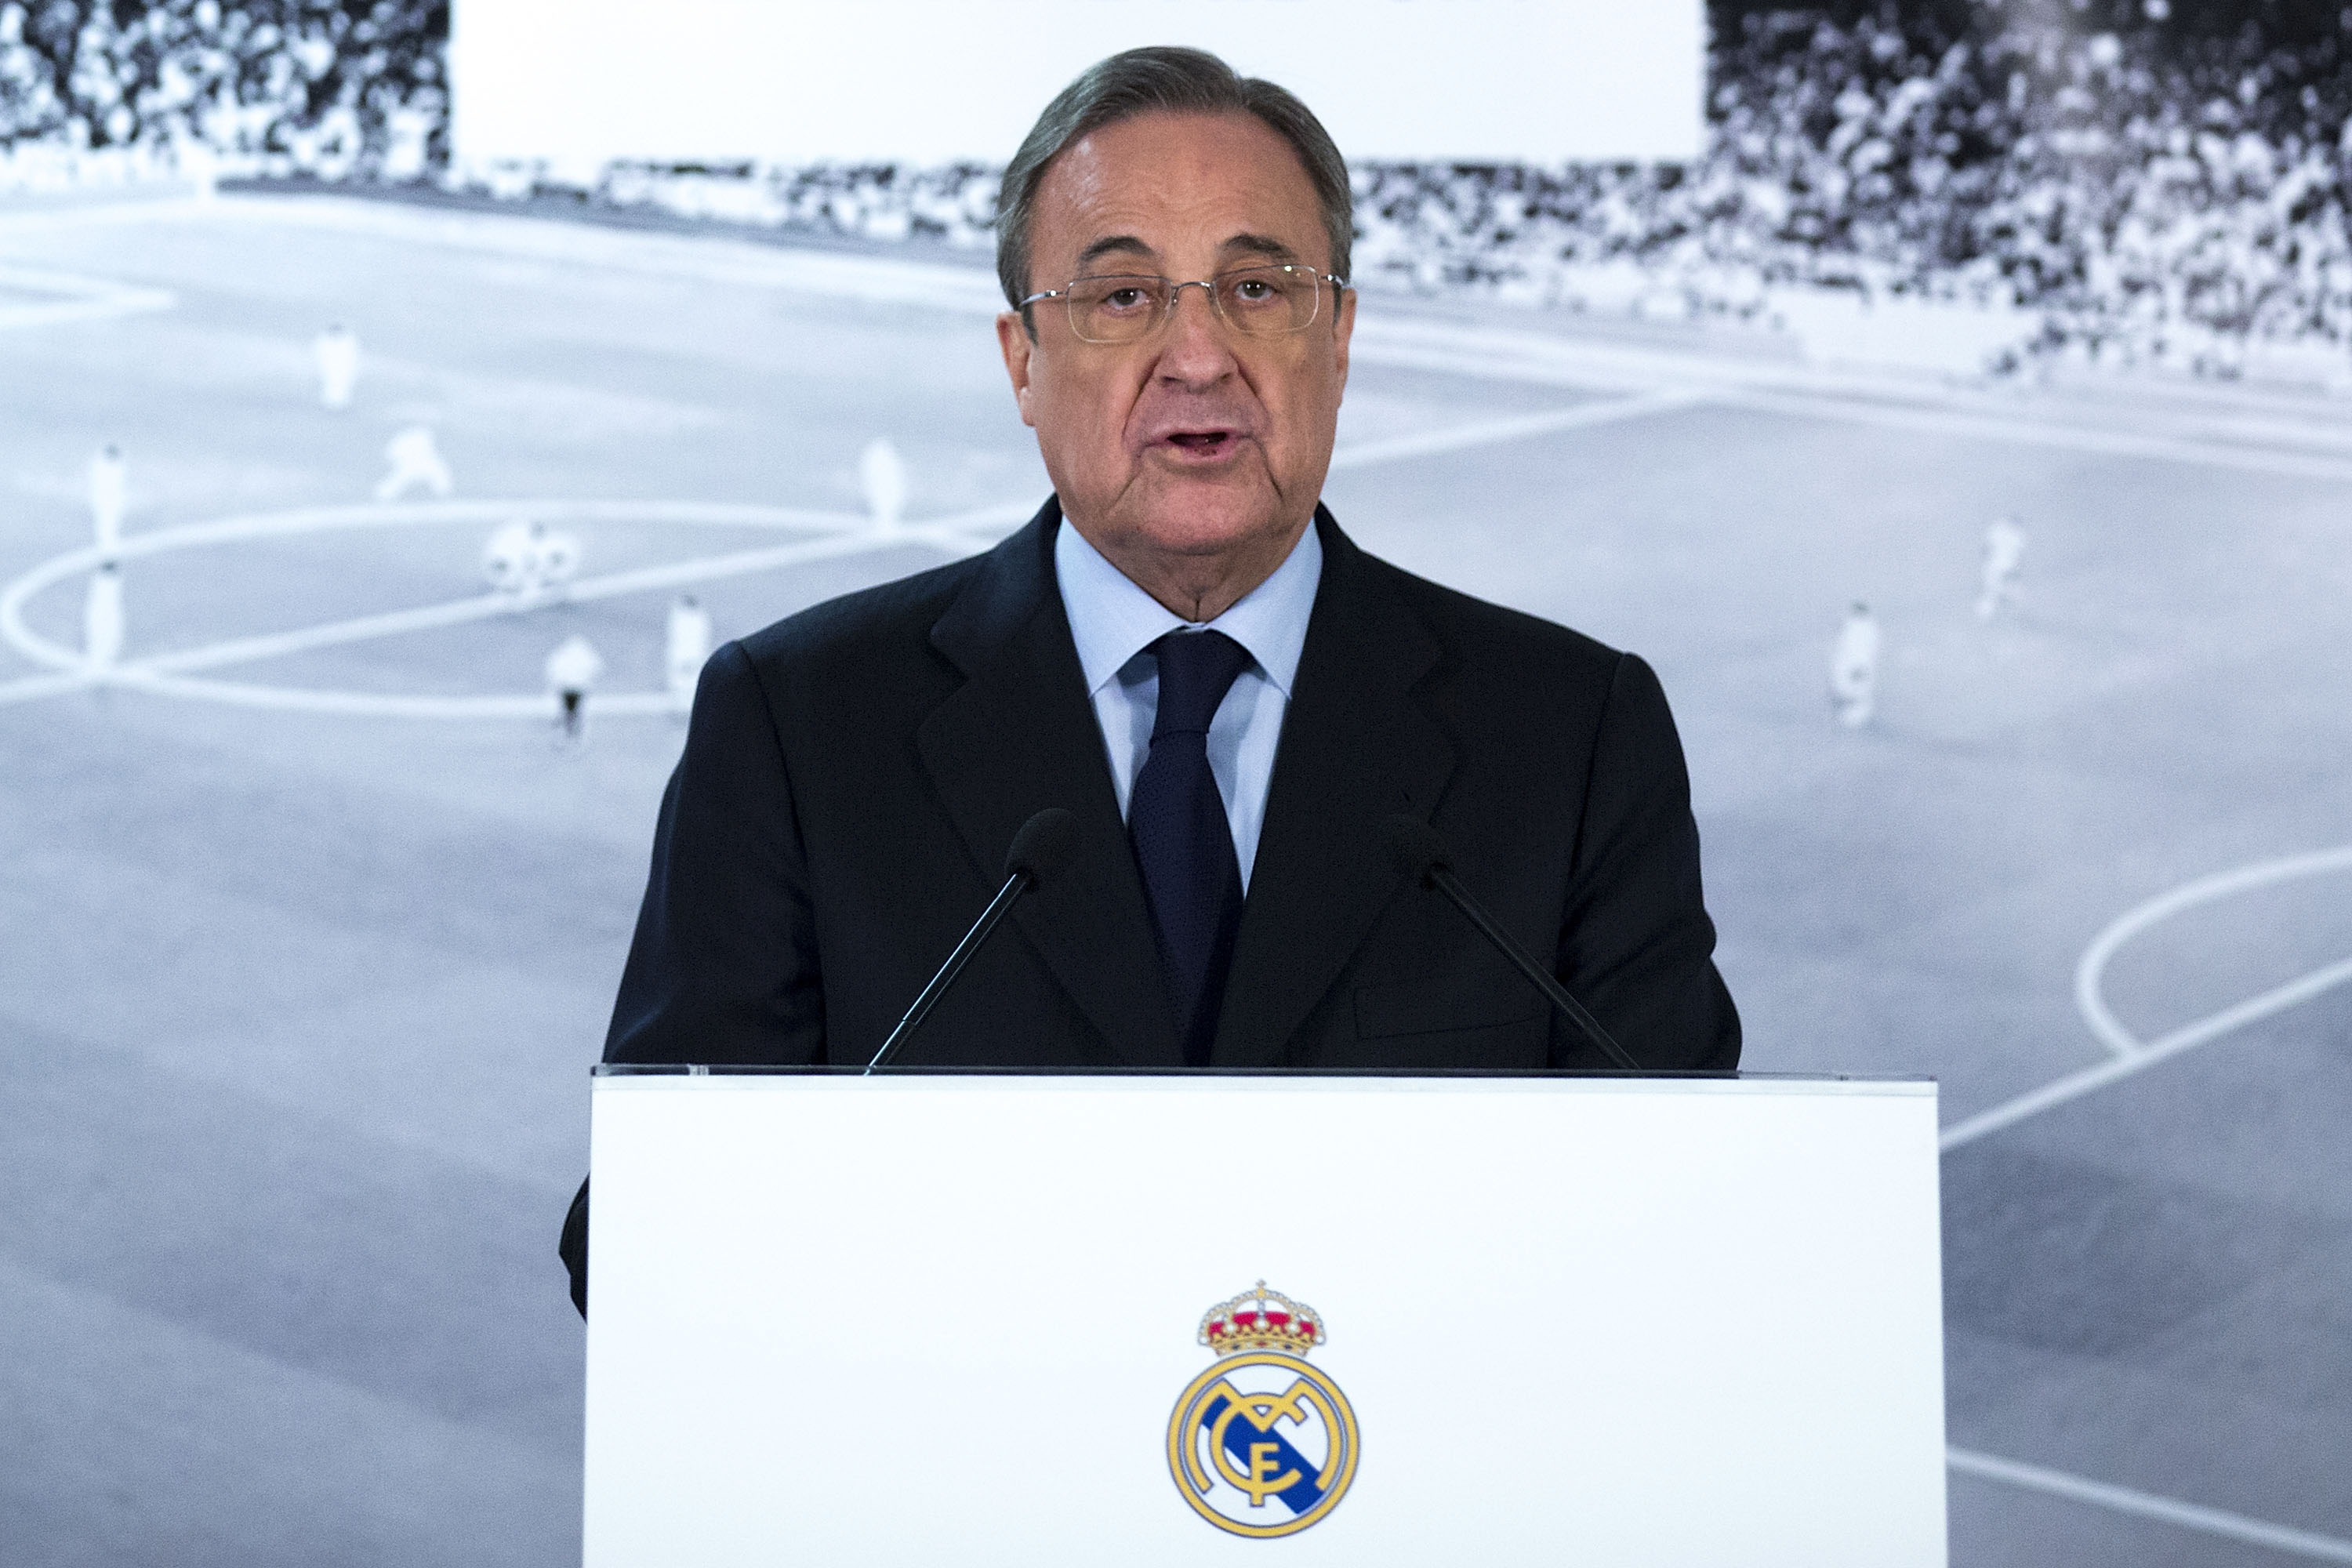 Football needs new formulas to make it stronger and must face new times, asserts Florentino Perez